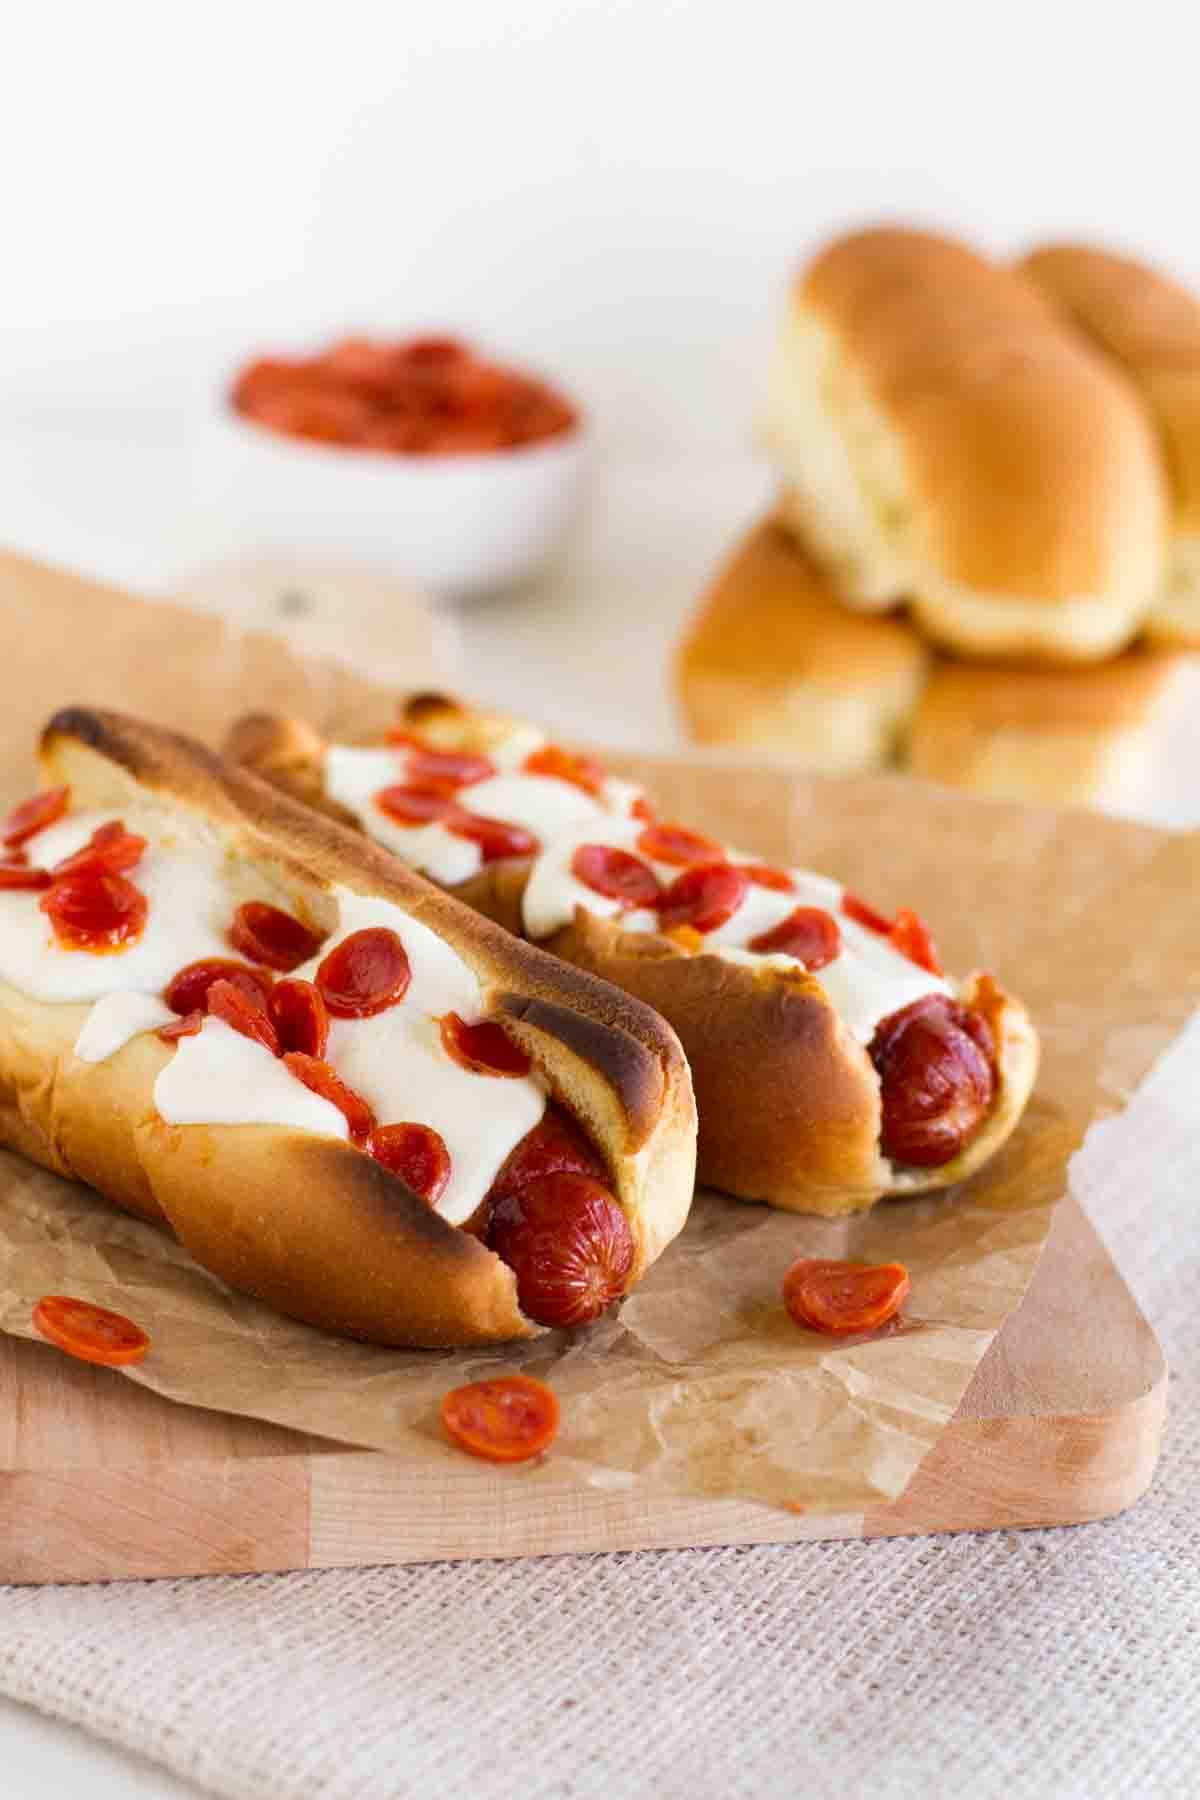 47 Best Hot Dog Recipes - Easy Ideas For Hot Dogs